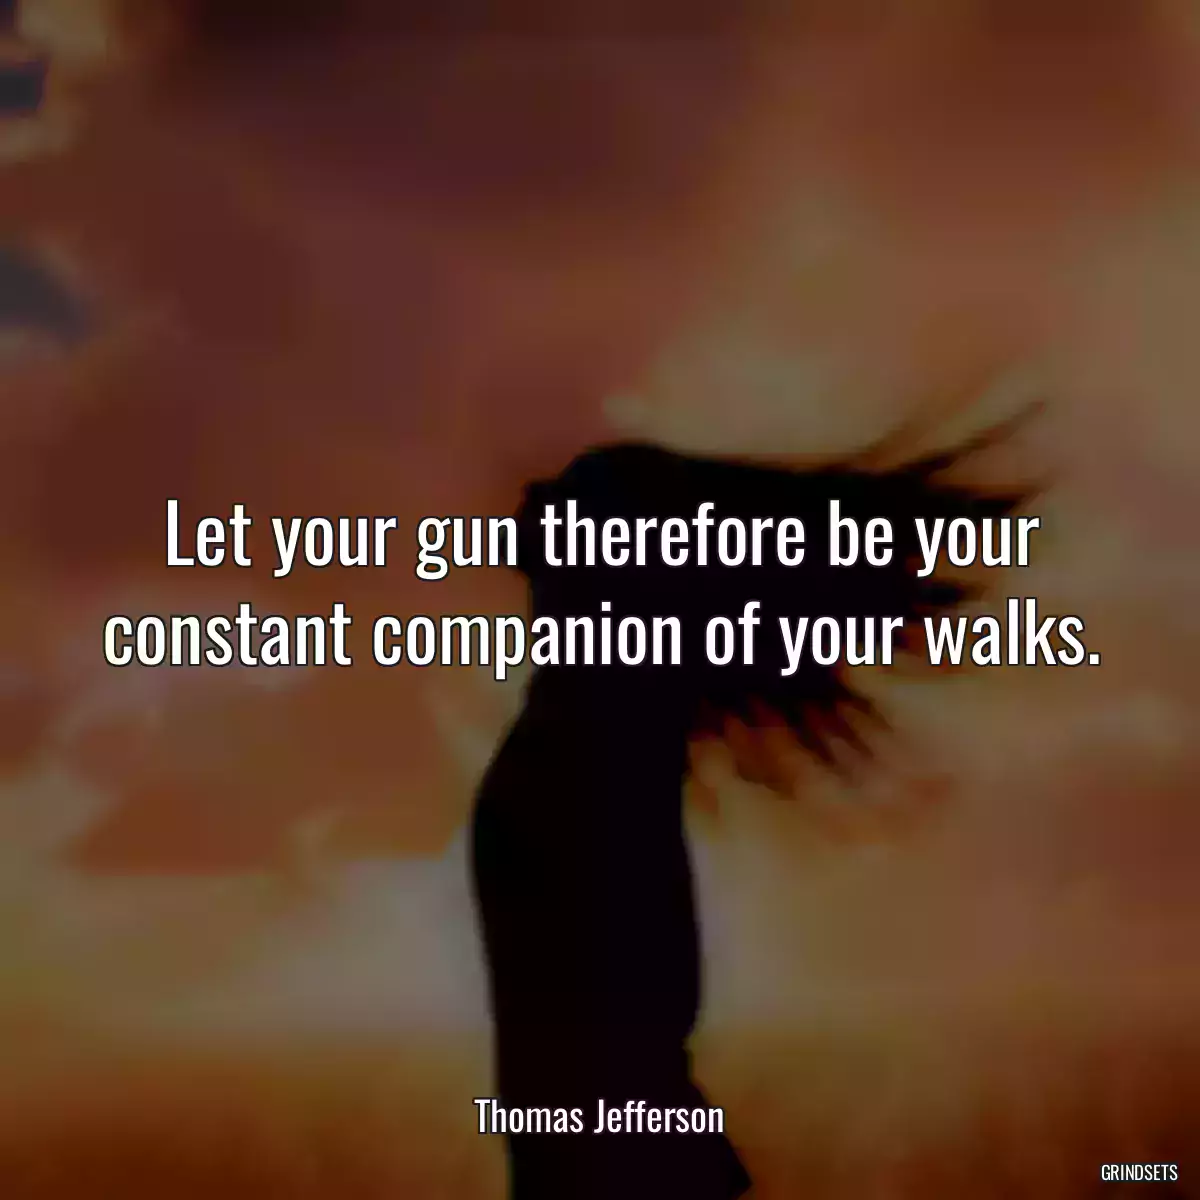 Let your gun therefore be your constant companion of your walks.